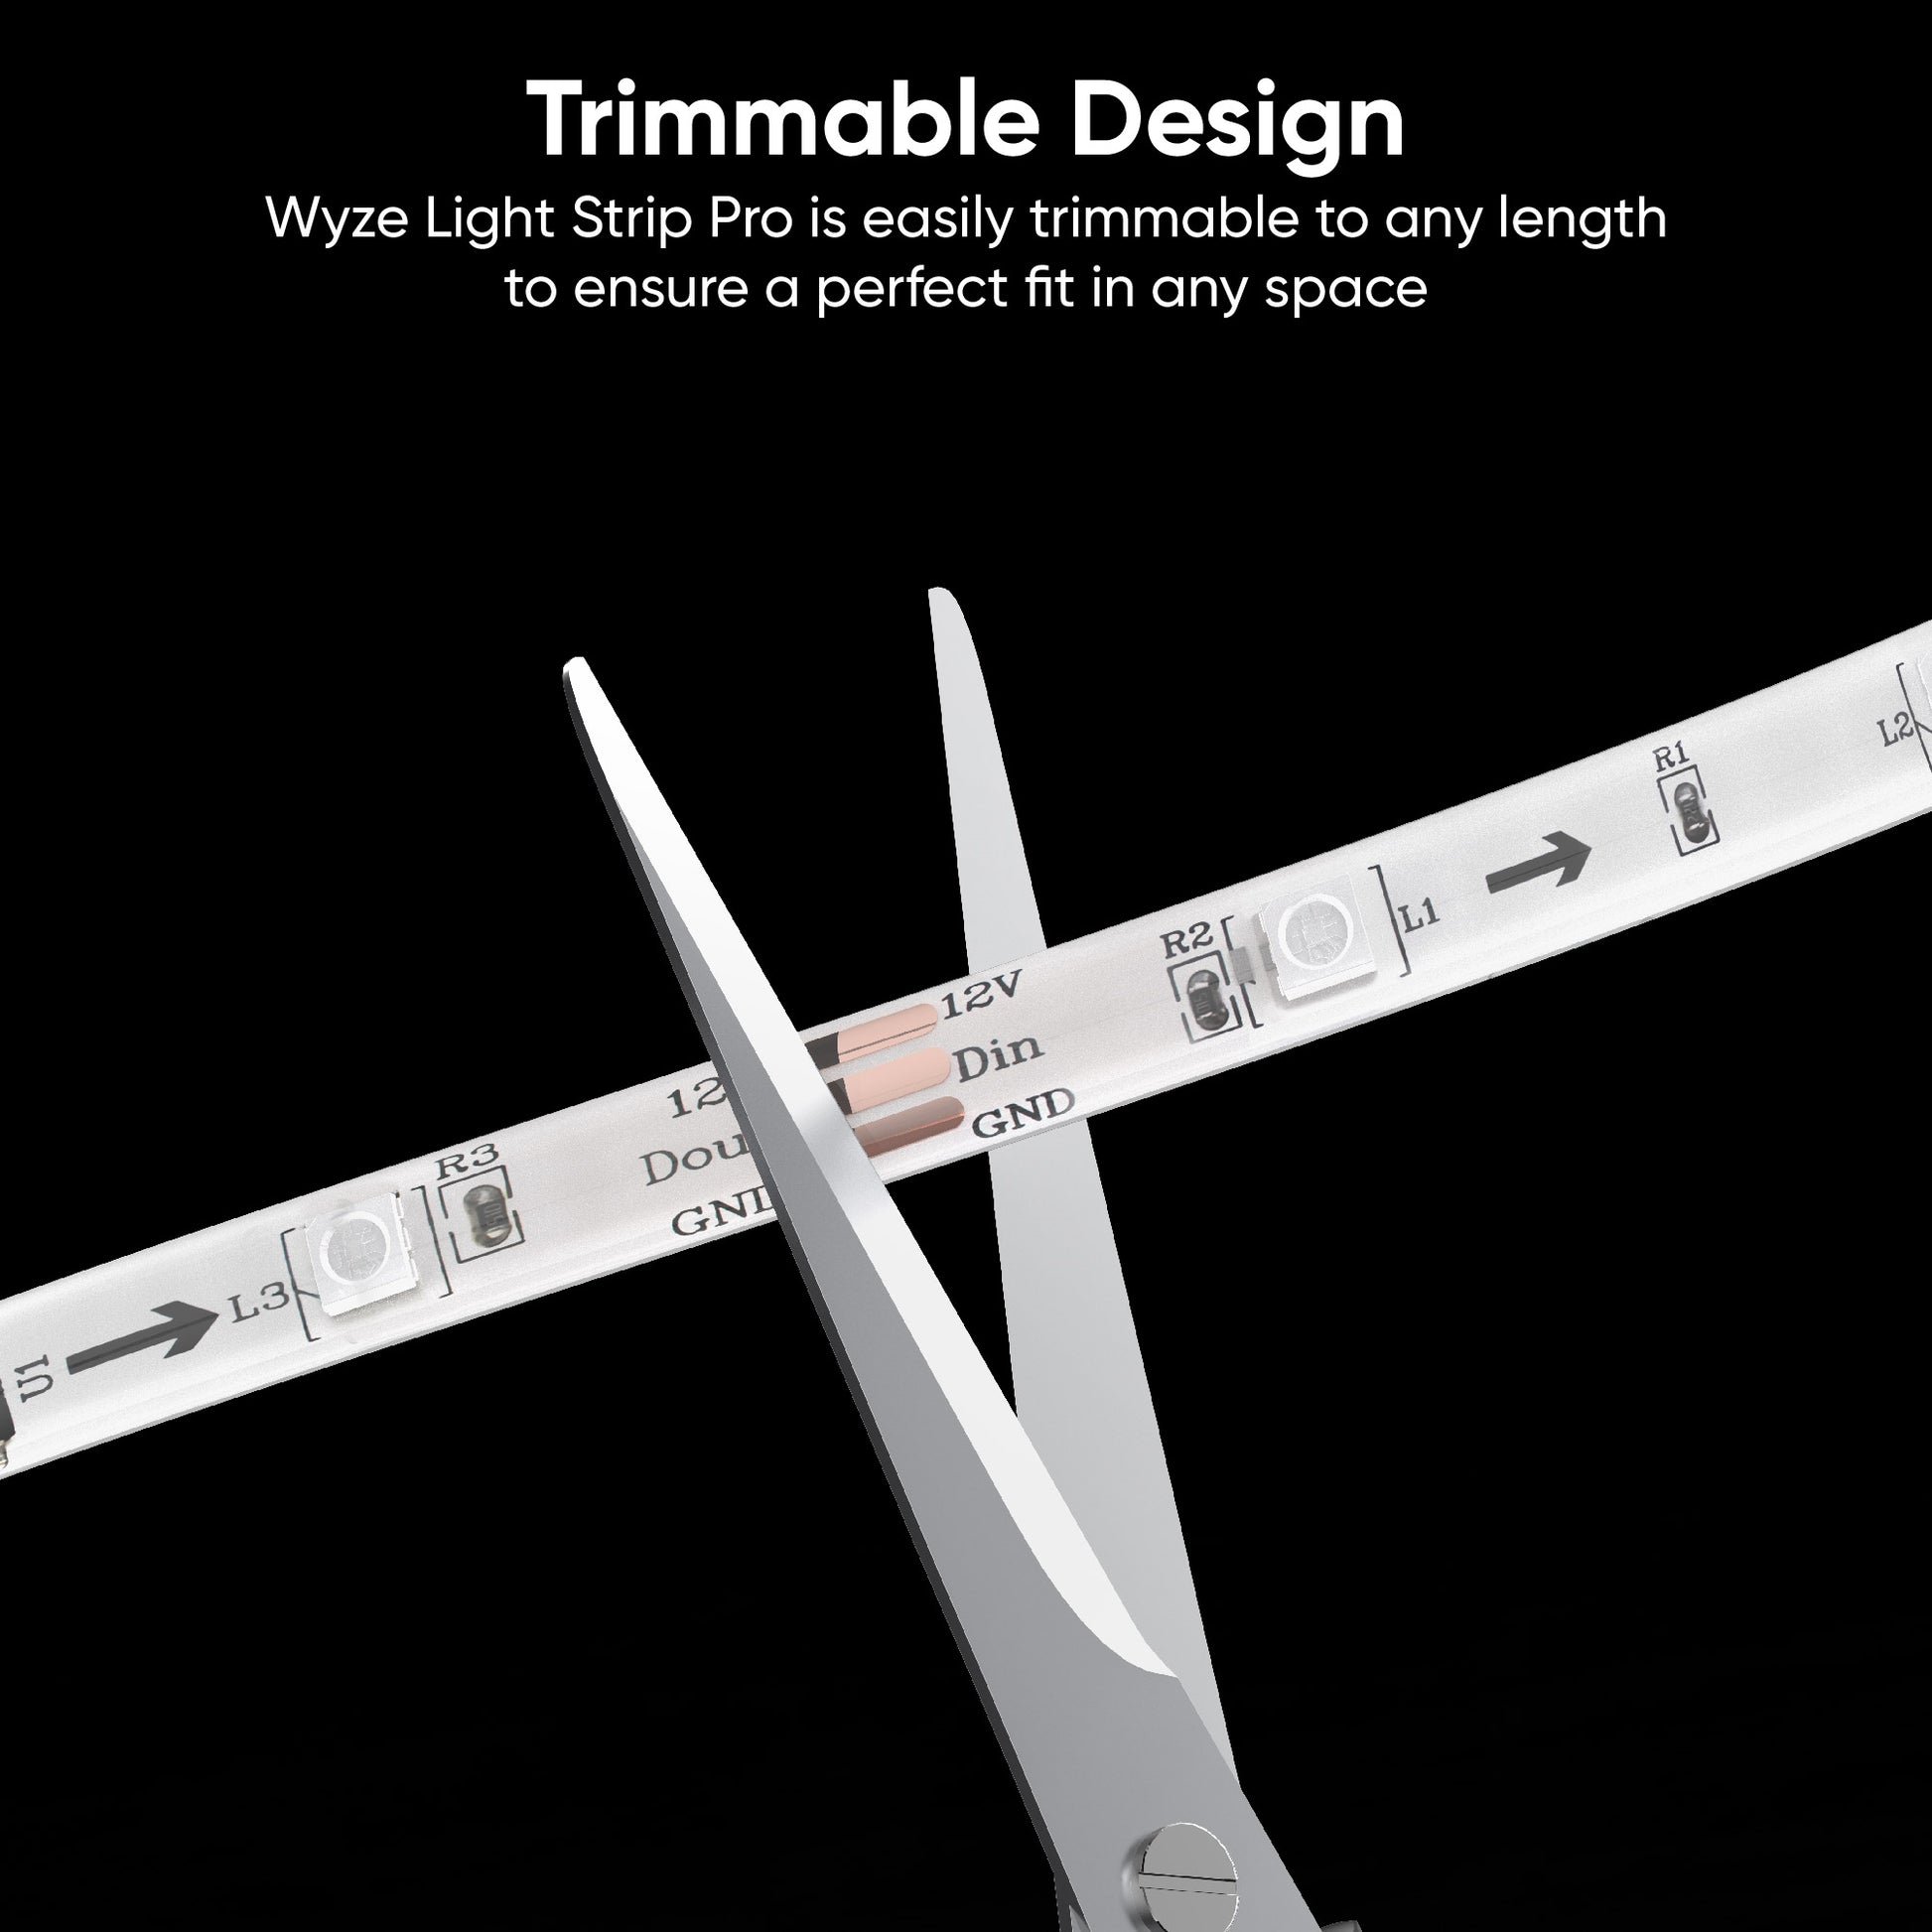 A pair of scissors cutting the light strip. Black text overlay that says "Precise customization to fit your space."